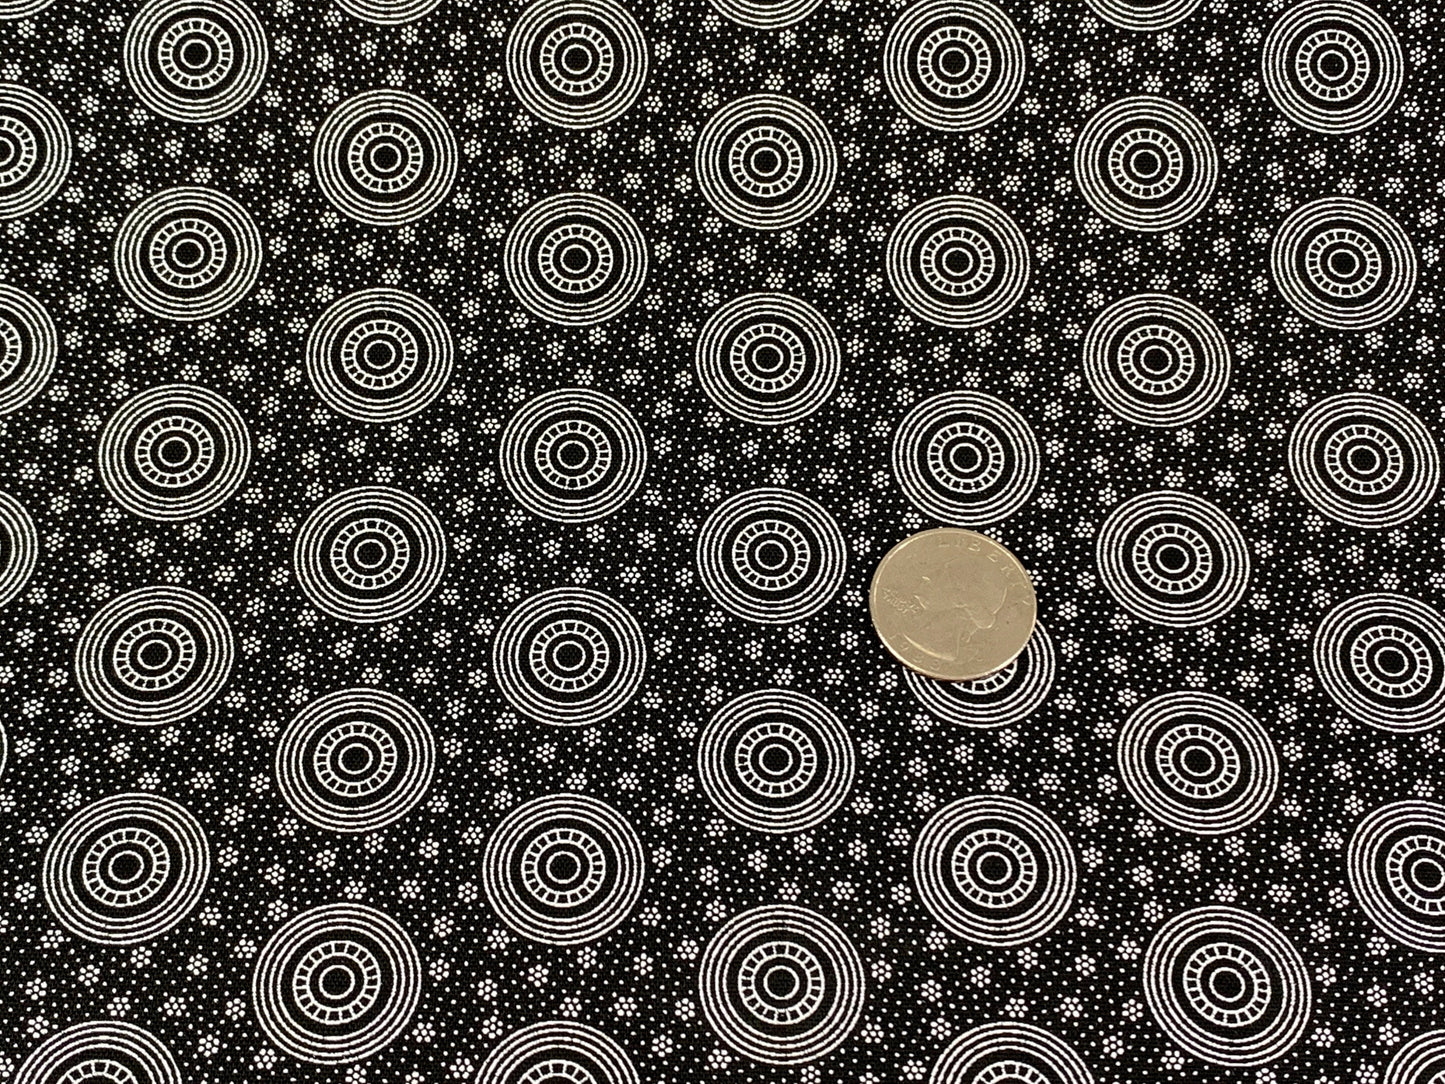 South African Shweshwe Fabric by the YARD. DaGama 3 Cats Black & White Discs and Dots. 100% Cotton Fabric for Quilting, Apparel, Home Decor